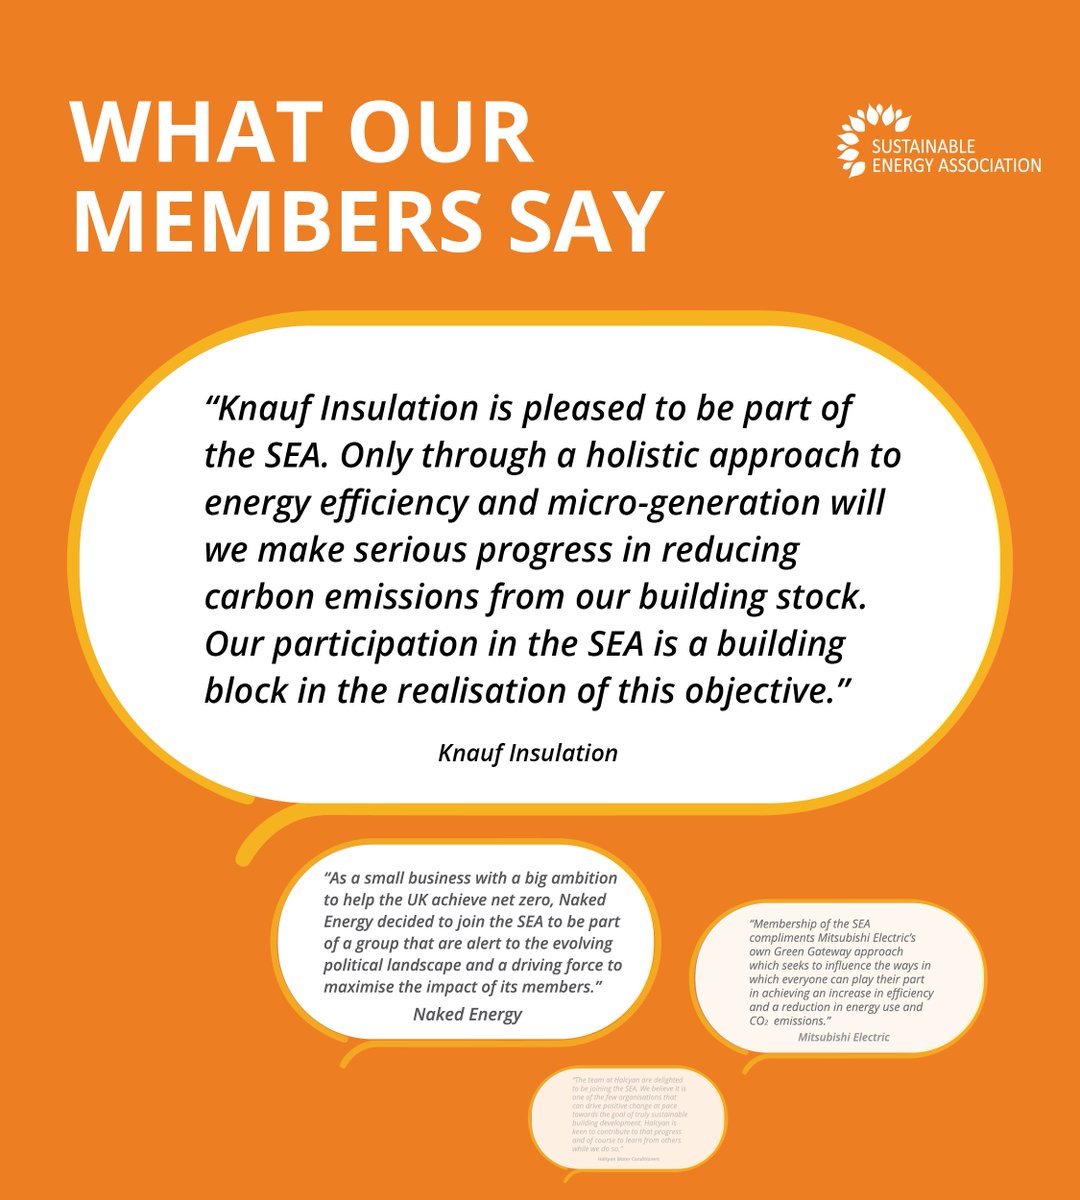 Our membership includes retailers and manufacturers of energy saving measures, insulation and heating systems, installers, energy suppliers, innovators, housing providers and more. Read what our members say: sustainableenergyassociation.com/membership/wha… #SustainableEnergy #EnergyEfficiency